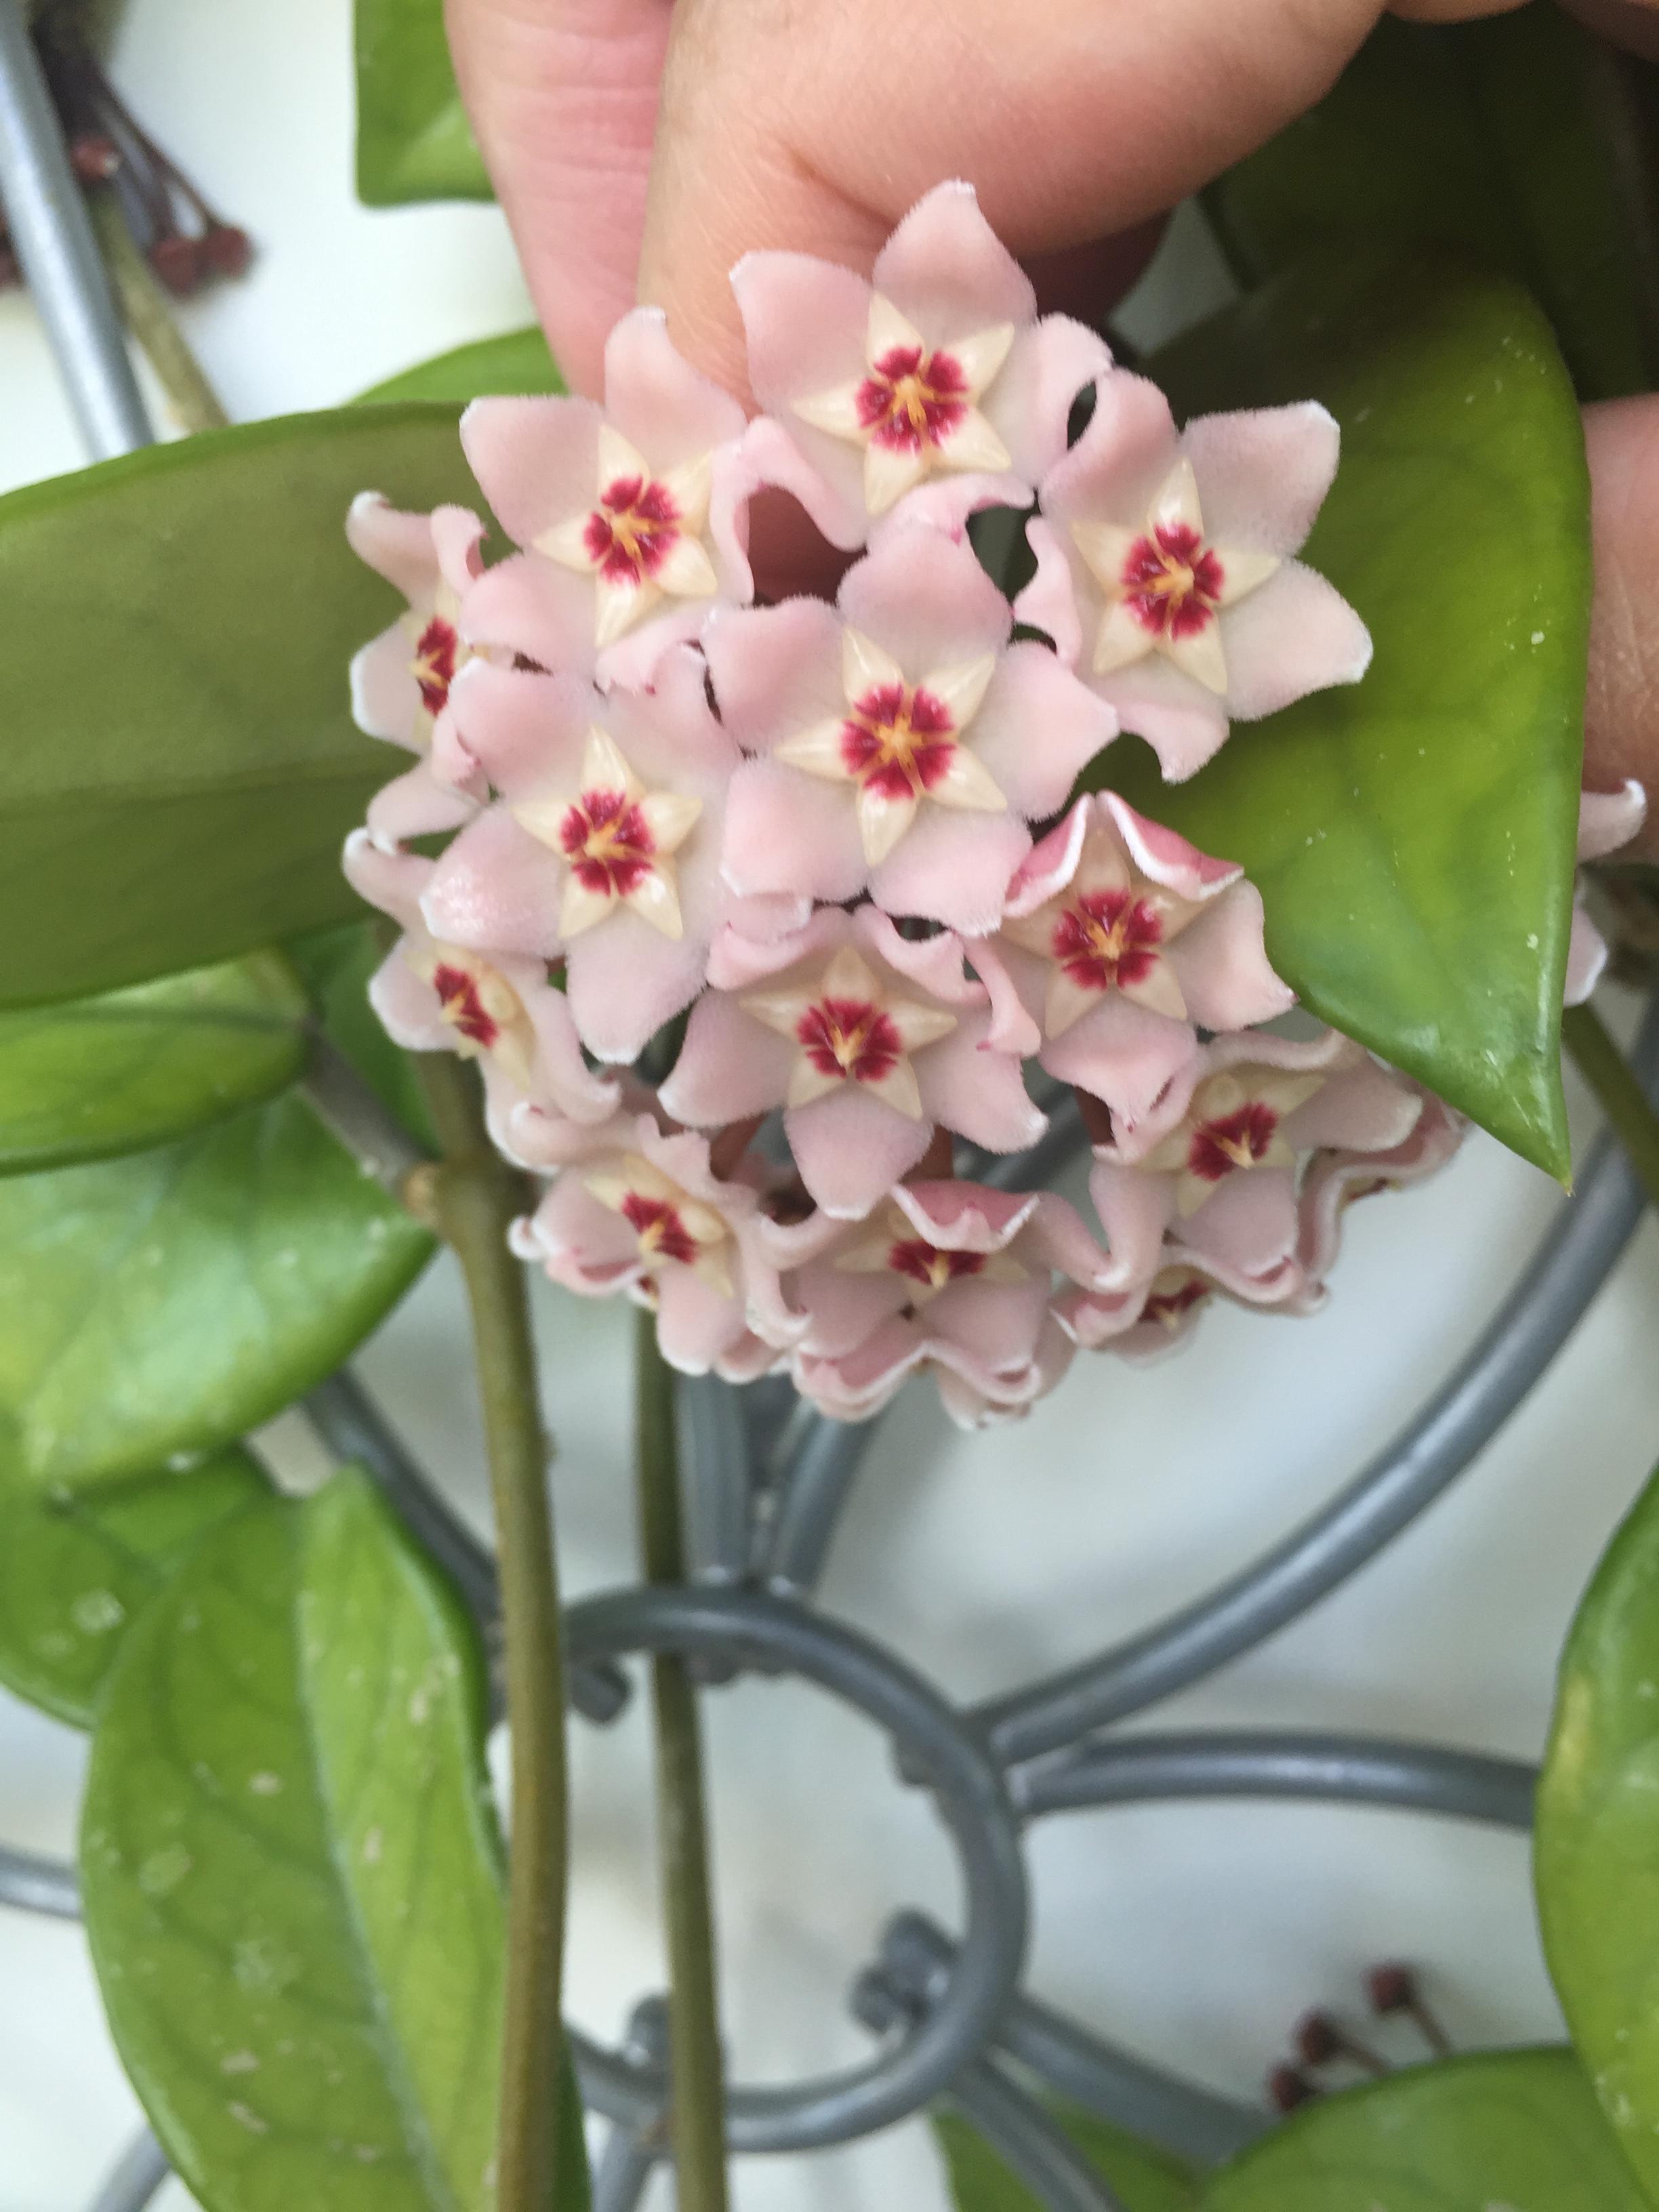 identification - What is this plant with clusters of pink flowers ...